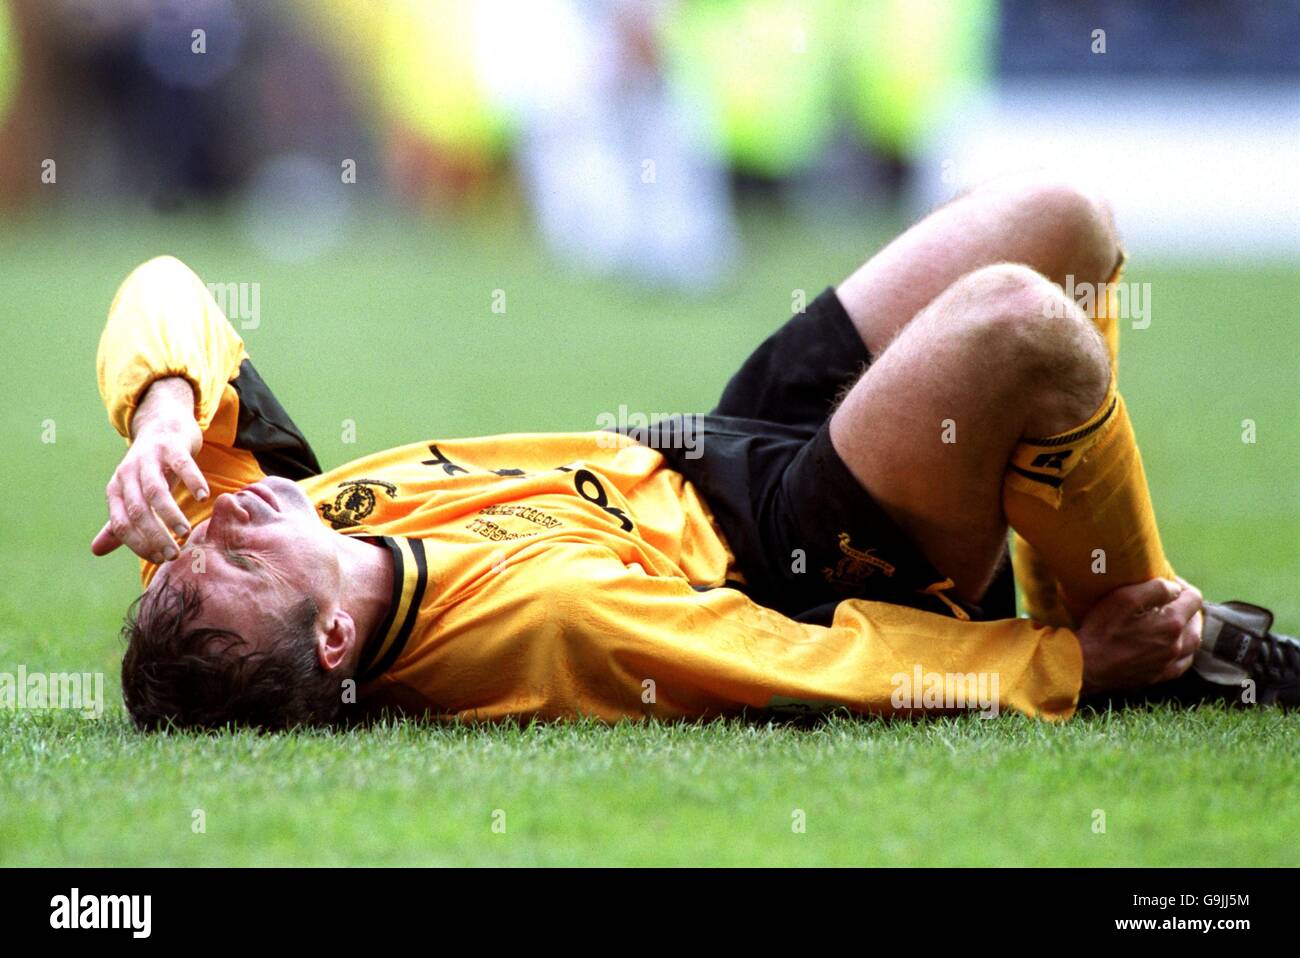 Scottish Soccer - Tennent's Scottish Cup - Semi Final - Hibernian v Livingston. Agony for Livingston's Alex Burns as his side are knocked out of the cup in the Semi-Finals against Hibs Stock Photo